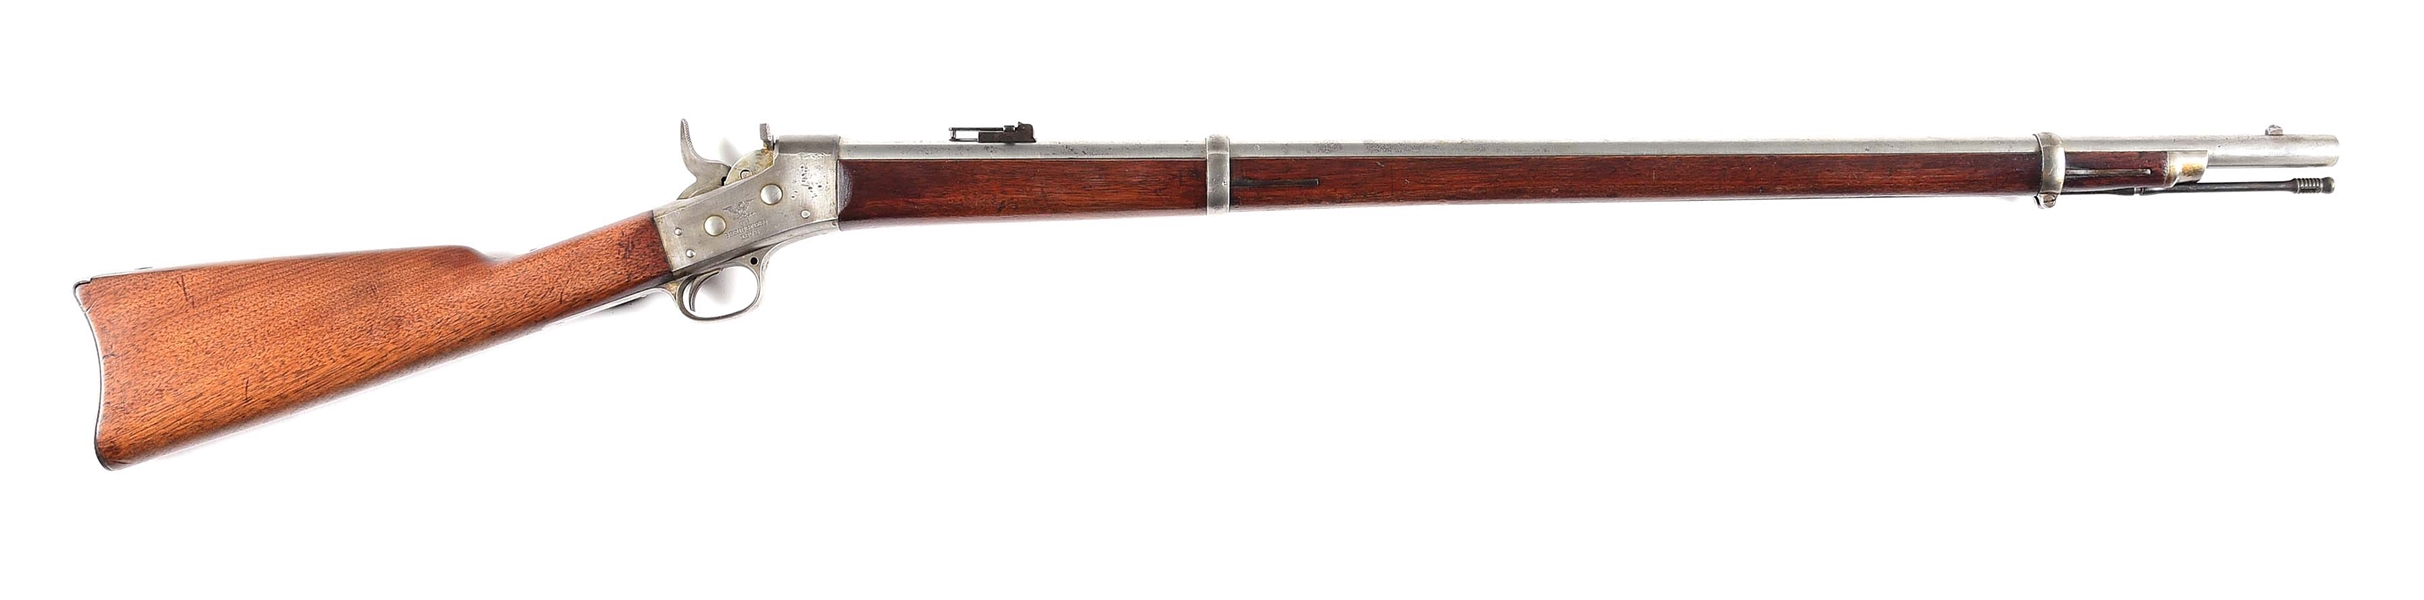 (A) SPRINGFIELD MODEL 1871 MILITARY RIFLE.